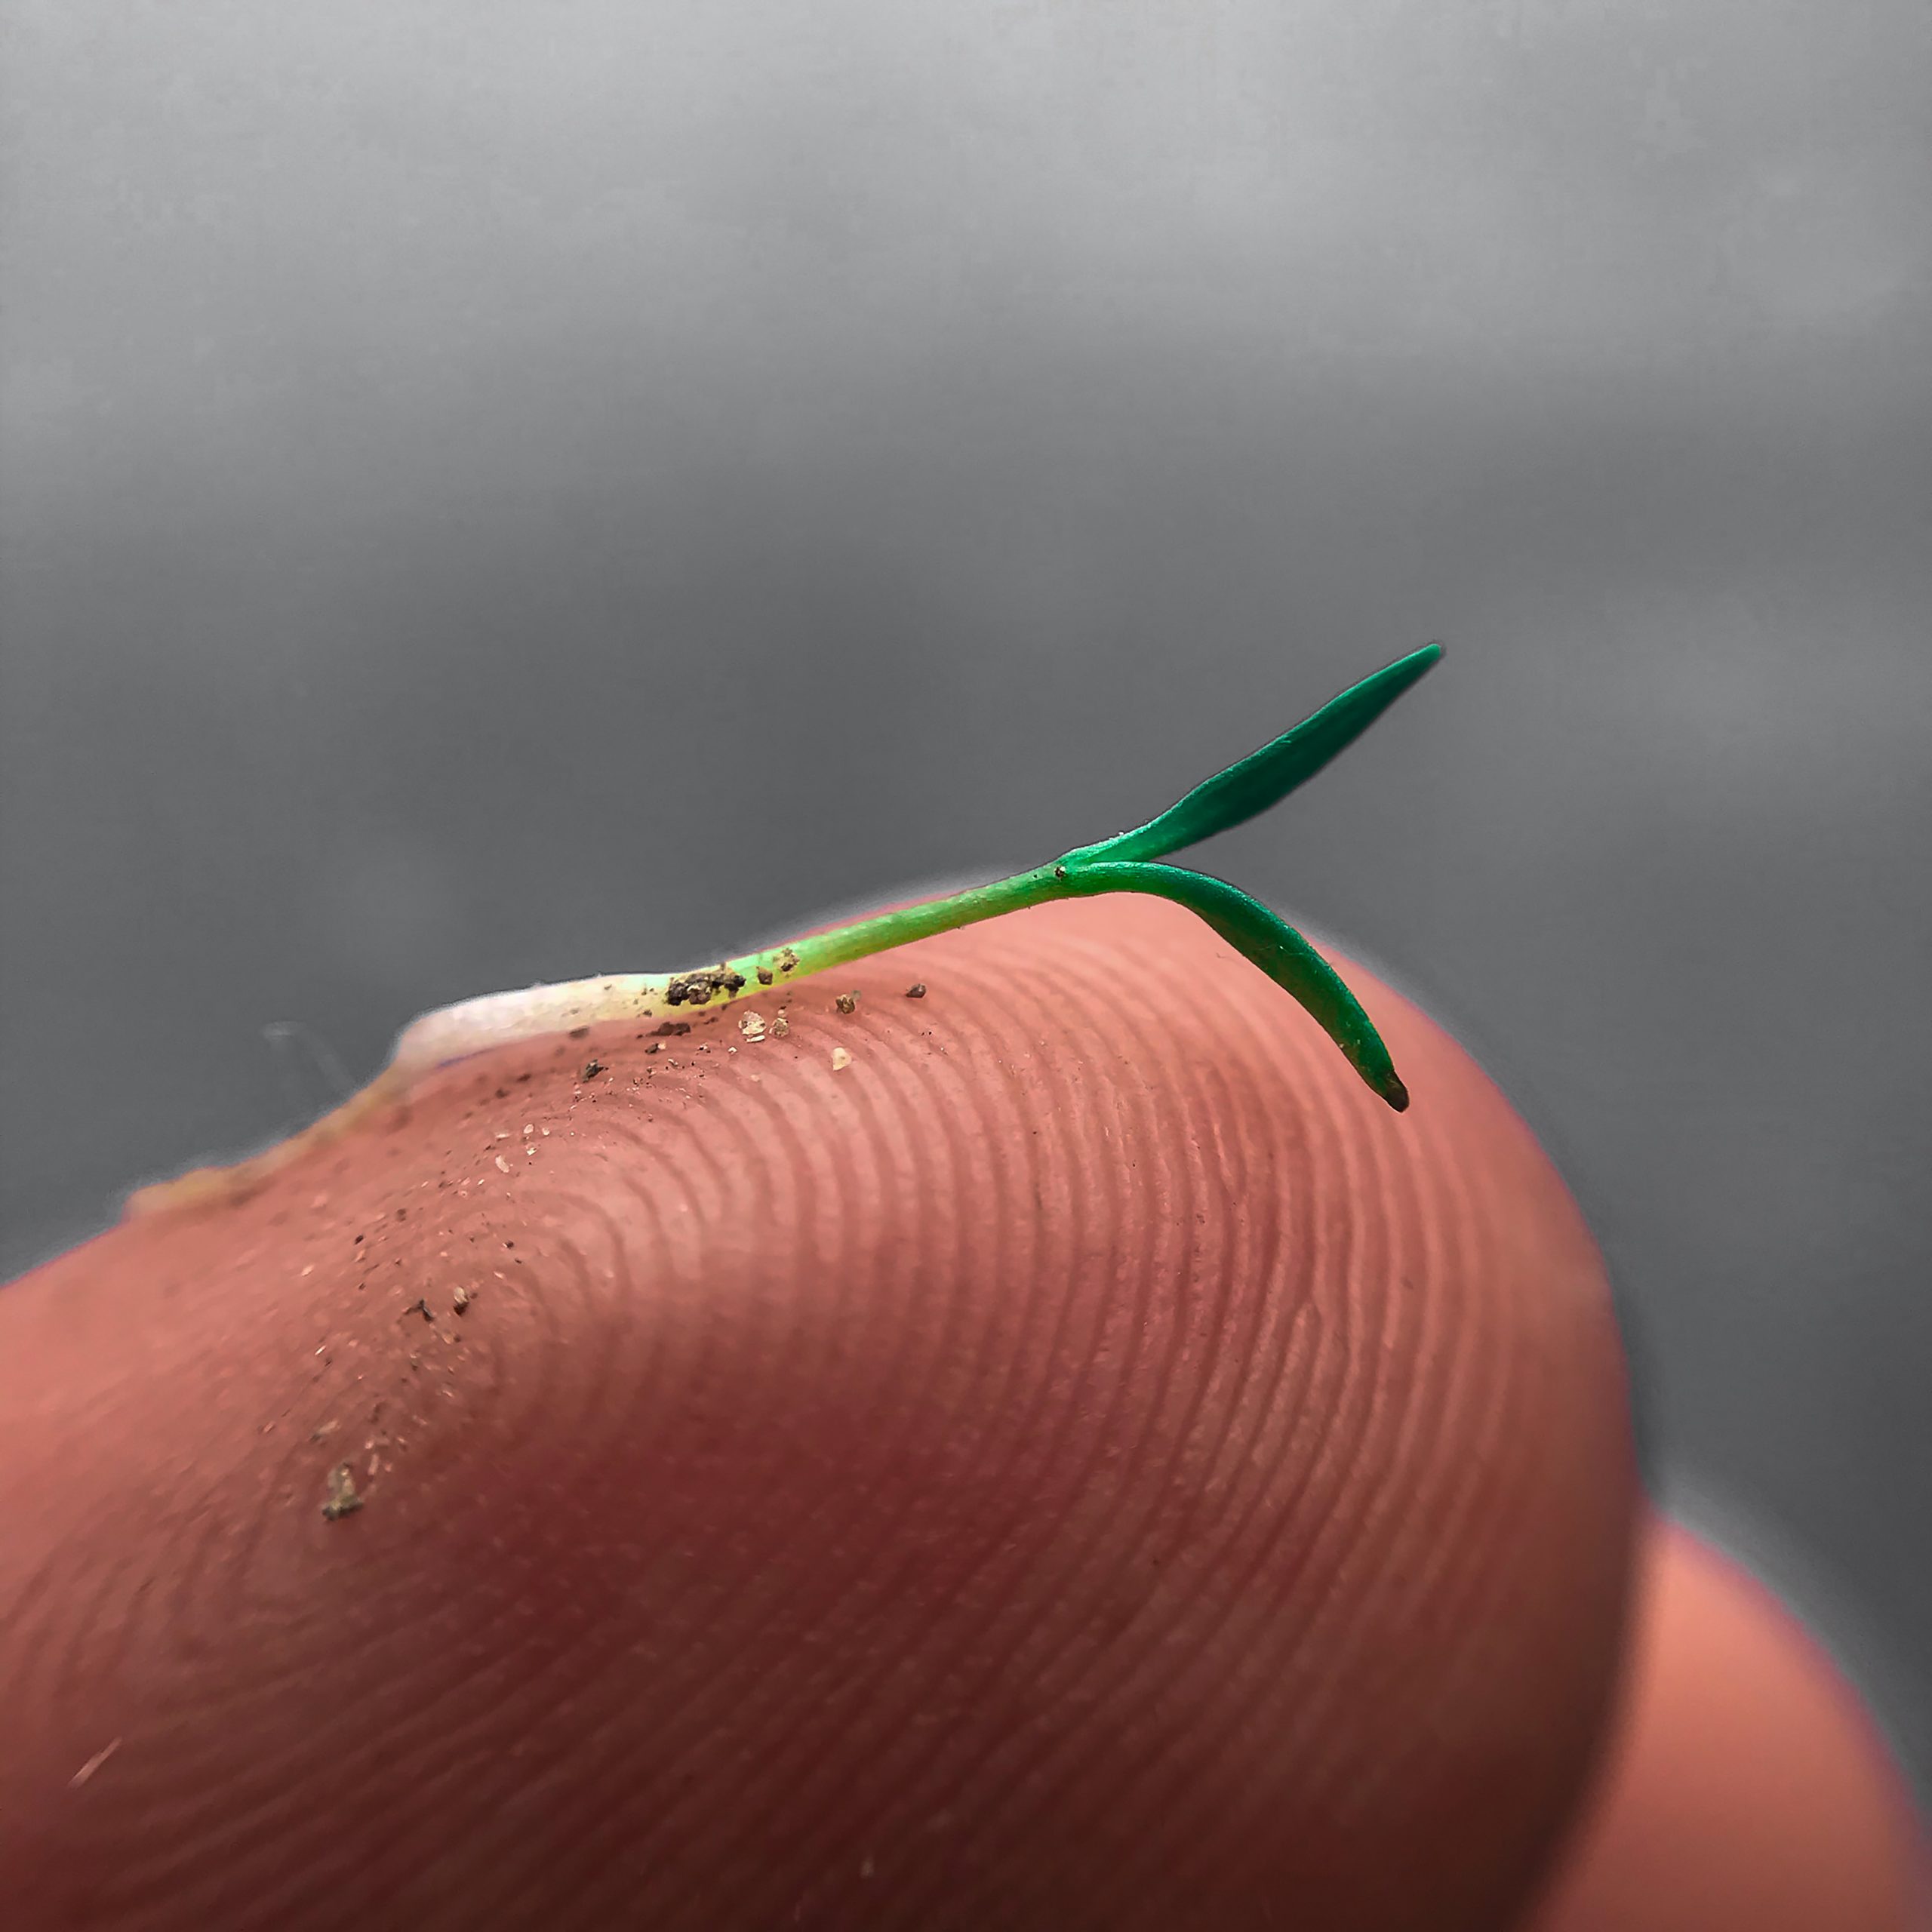 Micro Plant on a finger